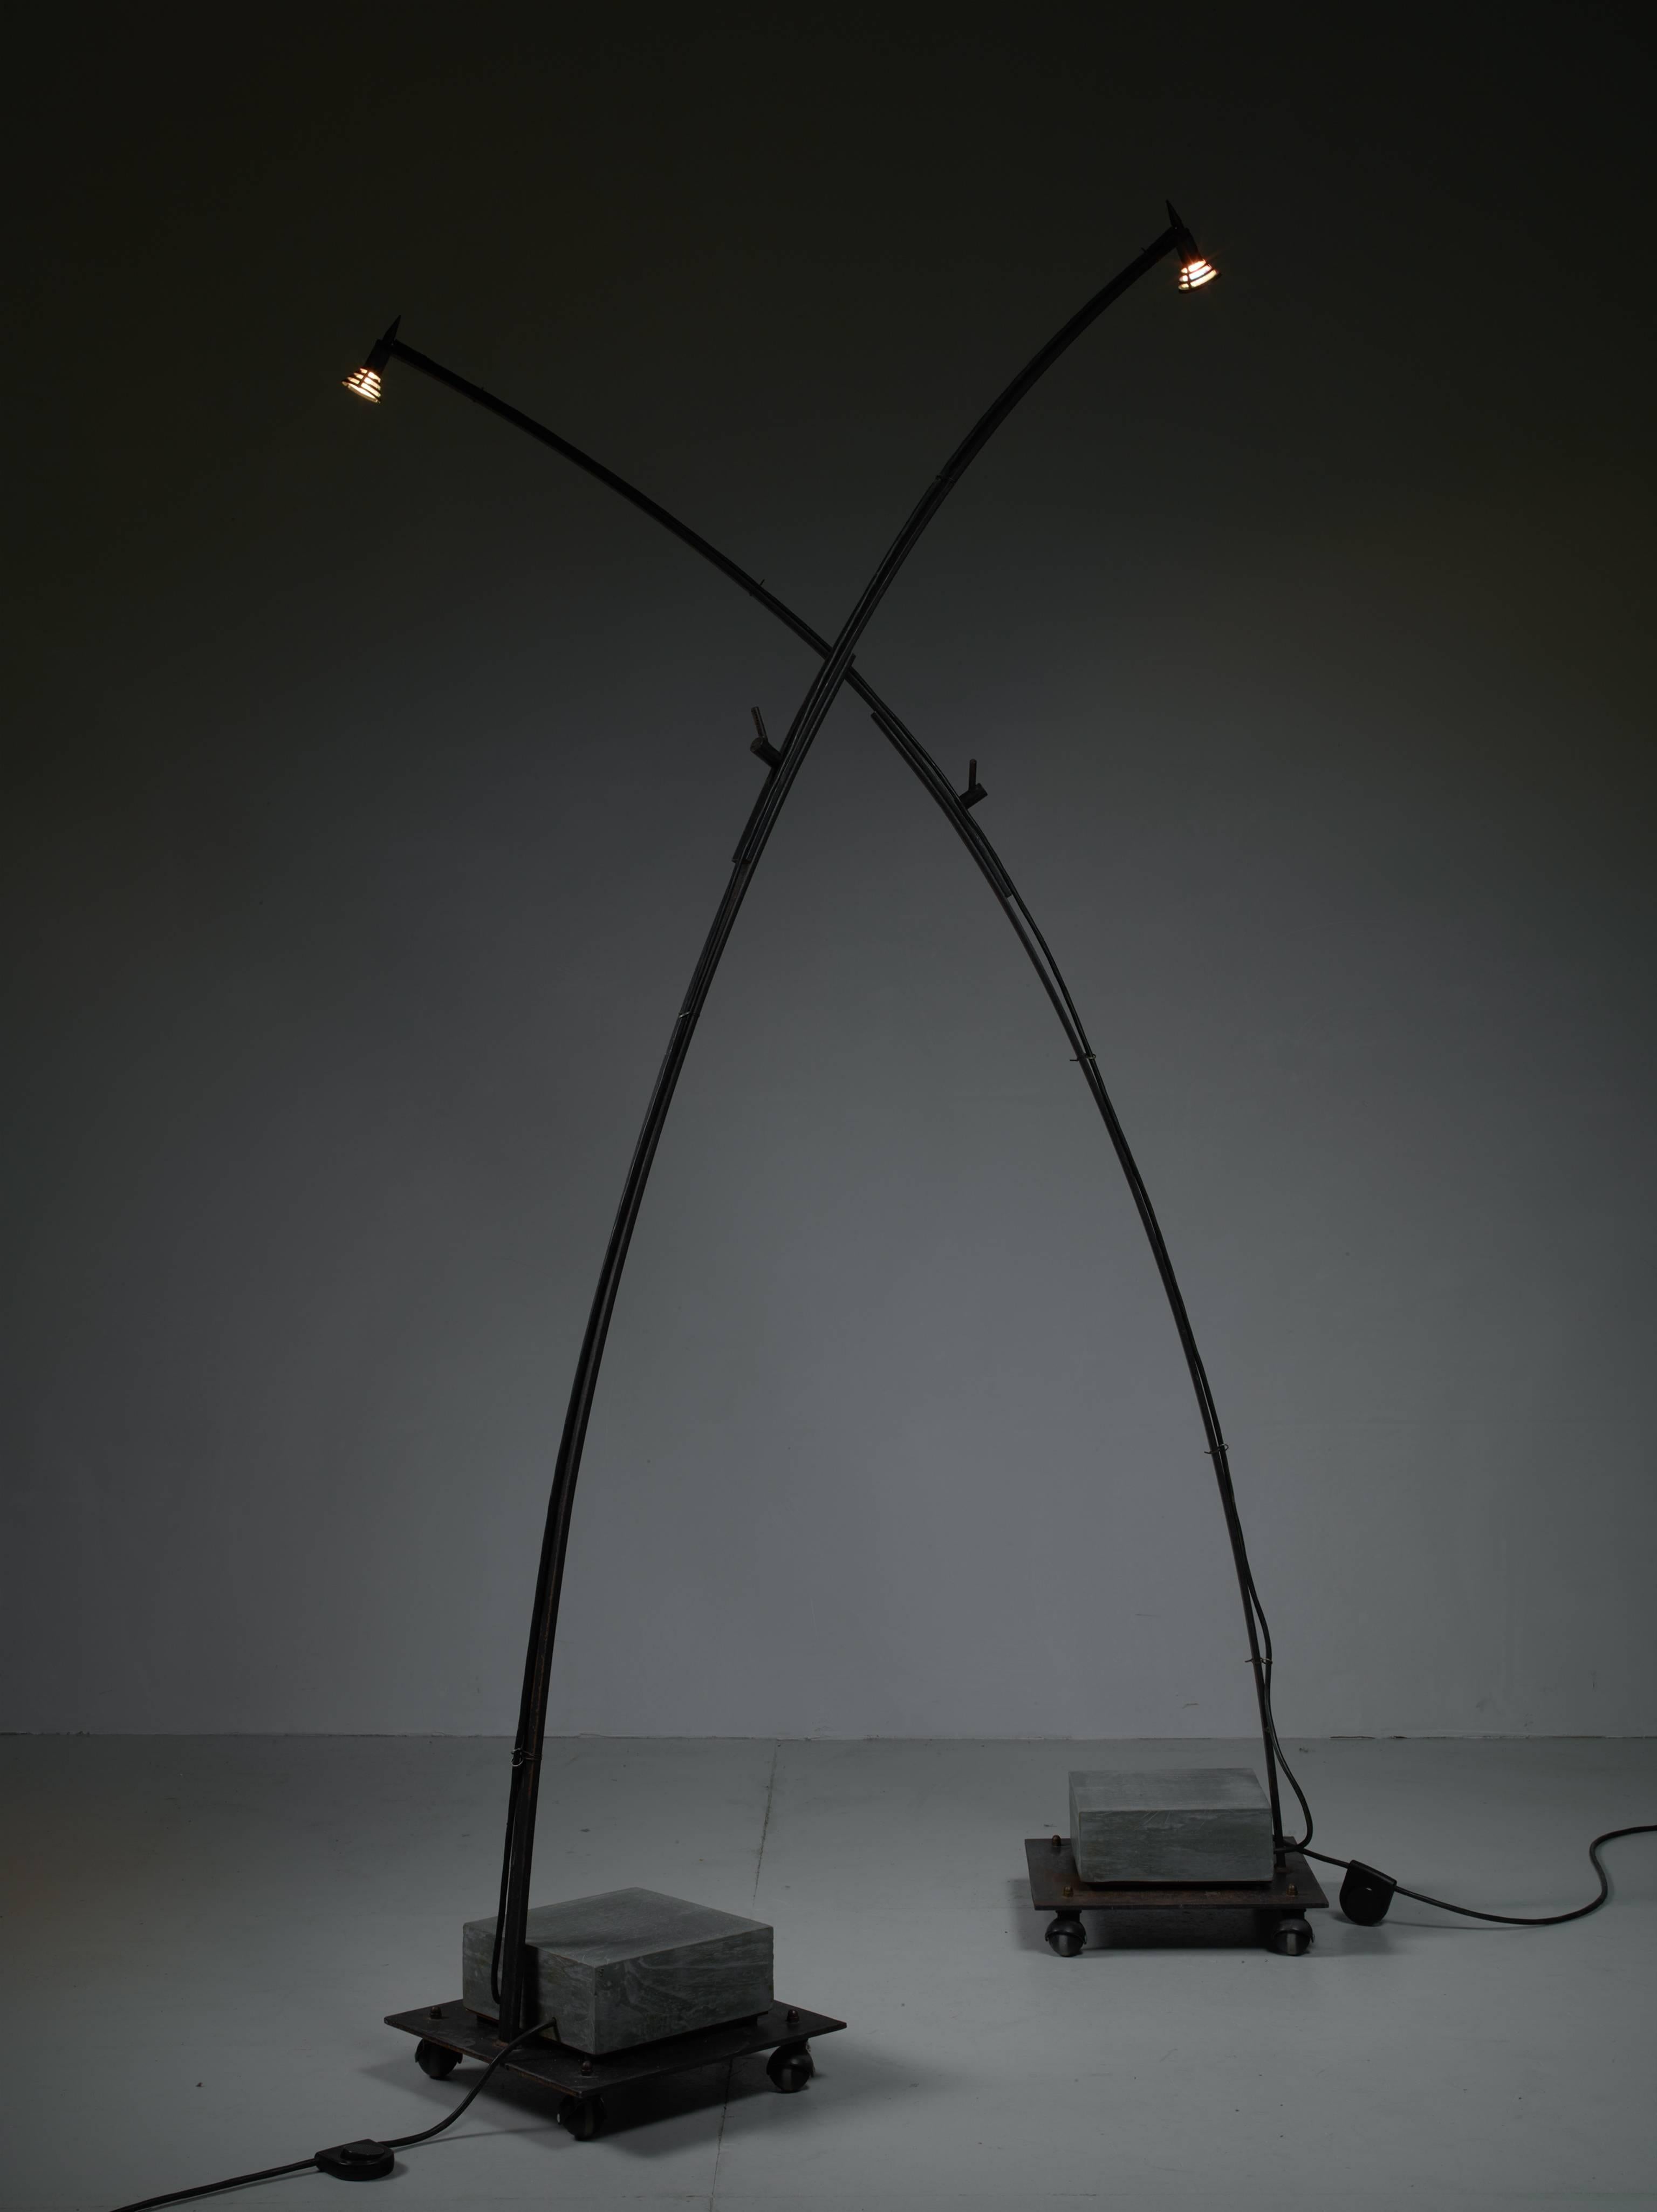 A pair of Industrial floor lamps made of metal.
They are reminiscent to the work of the Pentagon Group. 

The lamps stand on a square metal base with wheels and a concrete counterweight. The lamps have extendable arms with a halogen lamp bulb. When